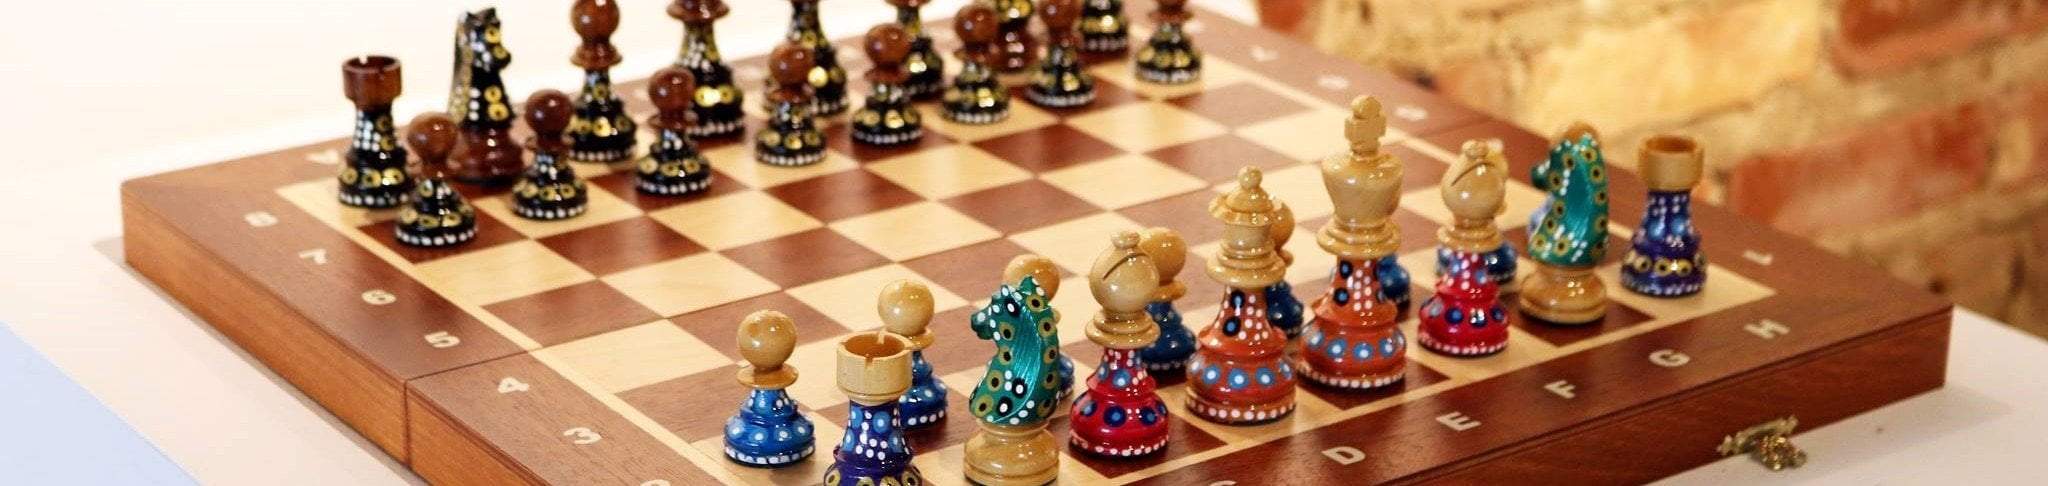 Sydney Gruber's Painted Chess Set Ideas